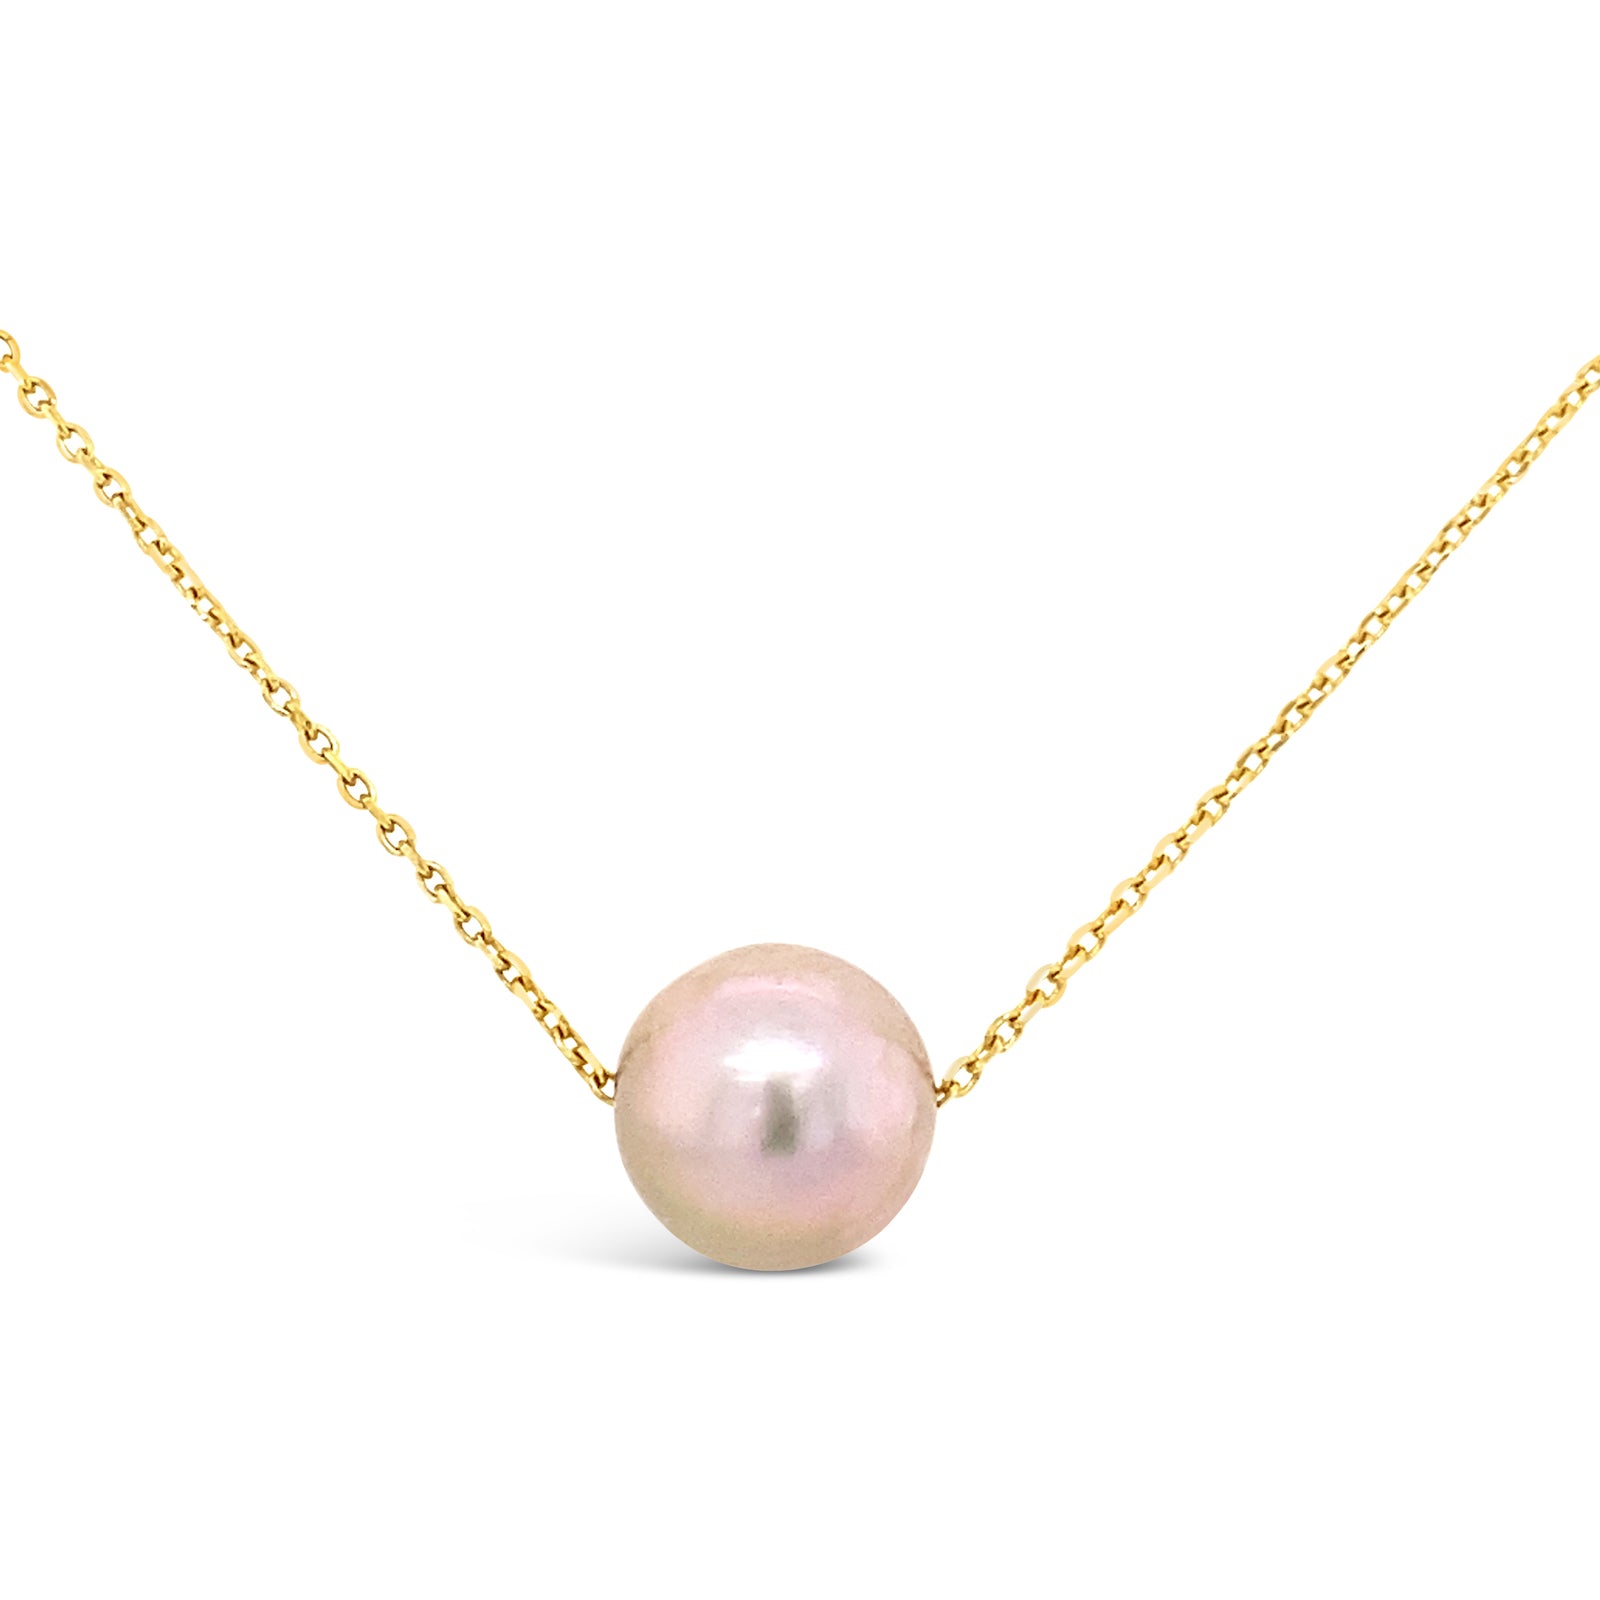 Floating pearl with a yellow gold chain 18K Gold